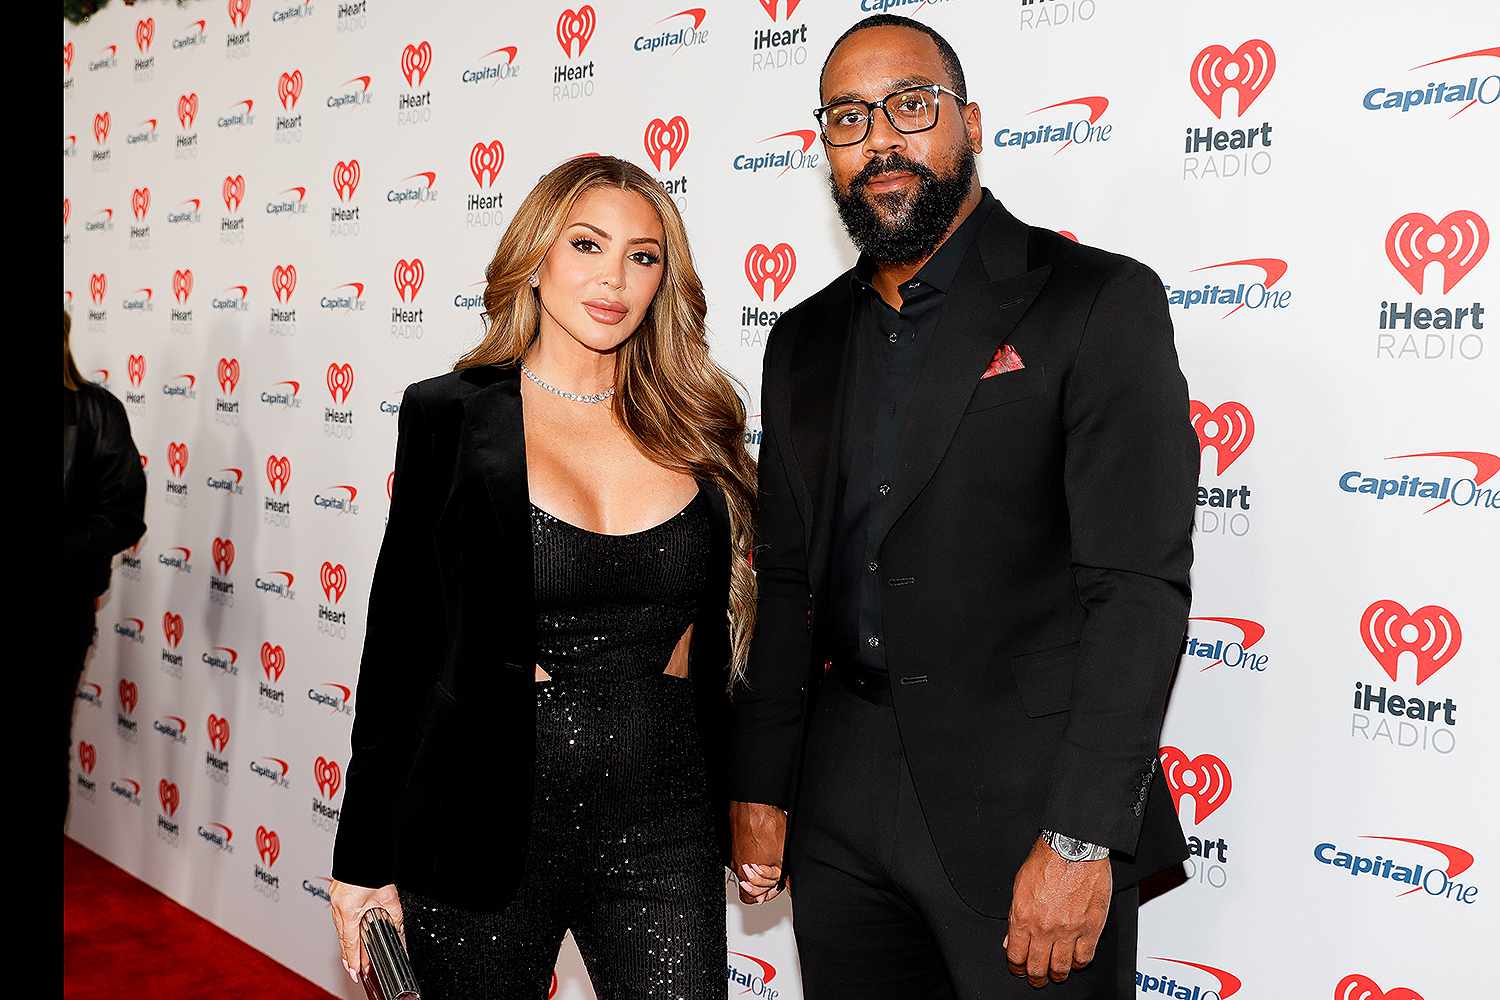 larsa-pippen-and-marcus-jordan-enjoy-valentines-dinner-after-relationship-pause